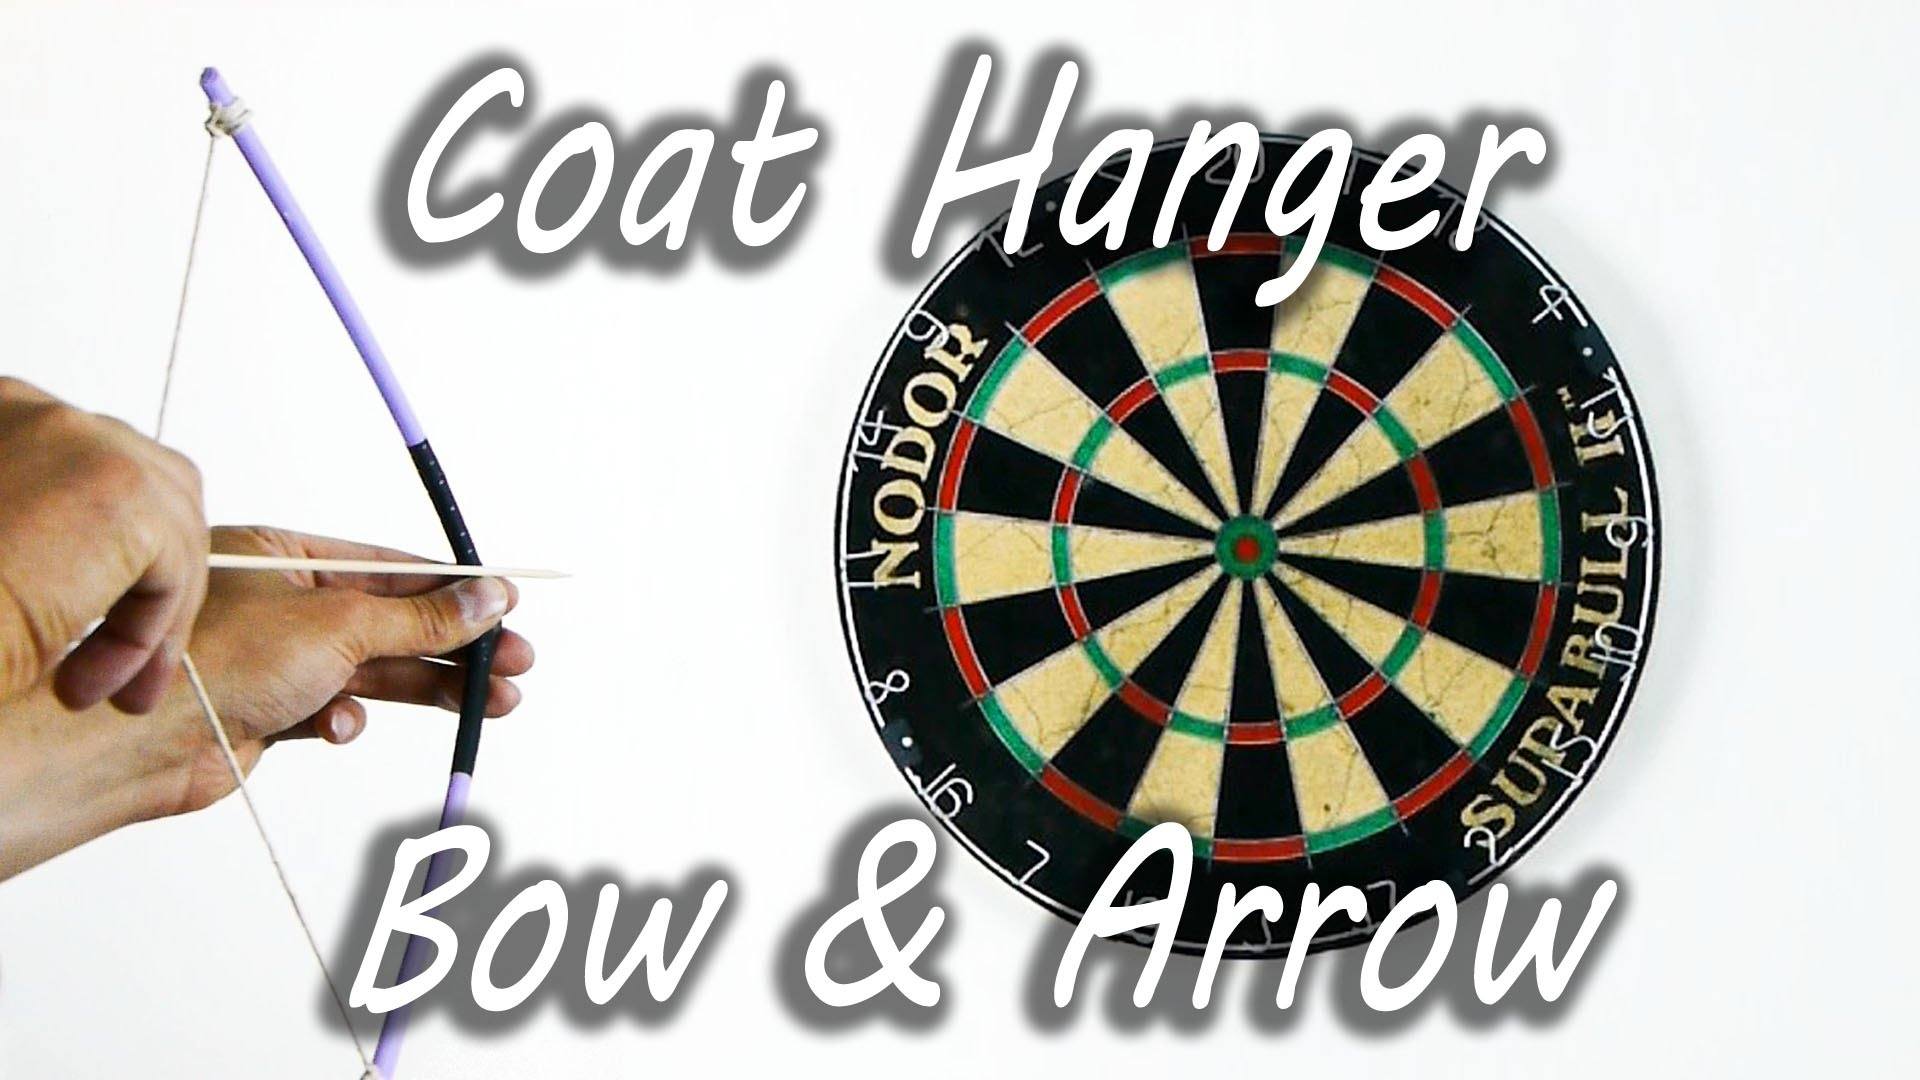 How to Make a Coat Hanger Bow and Arrow